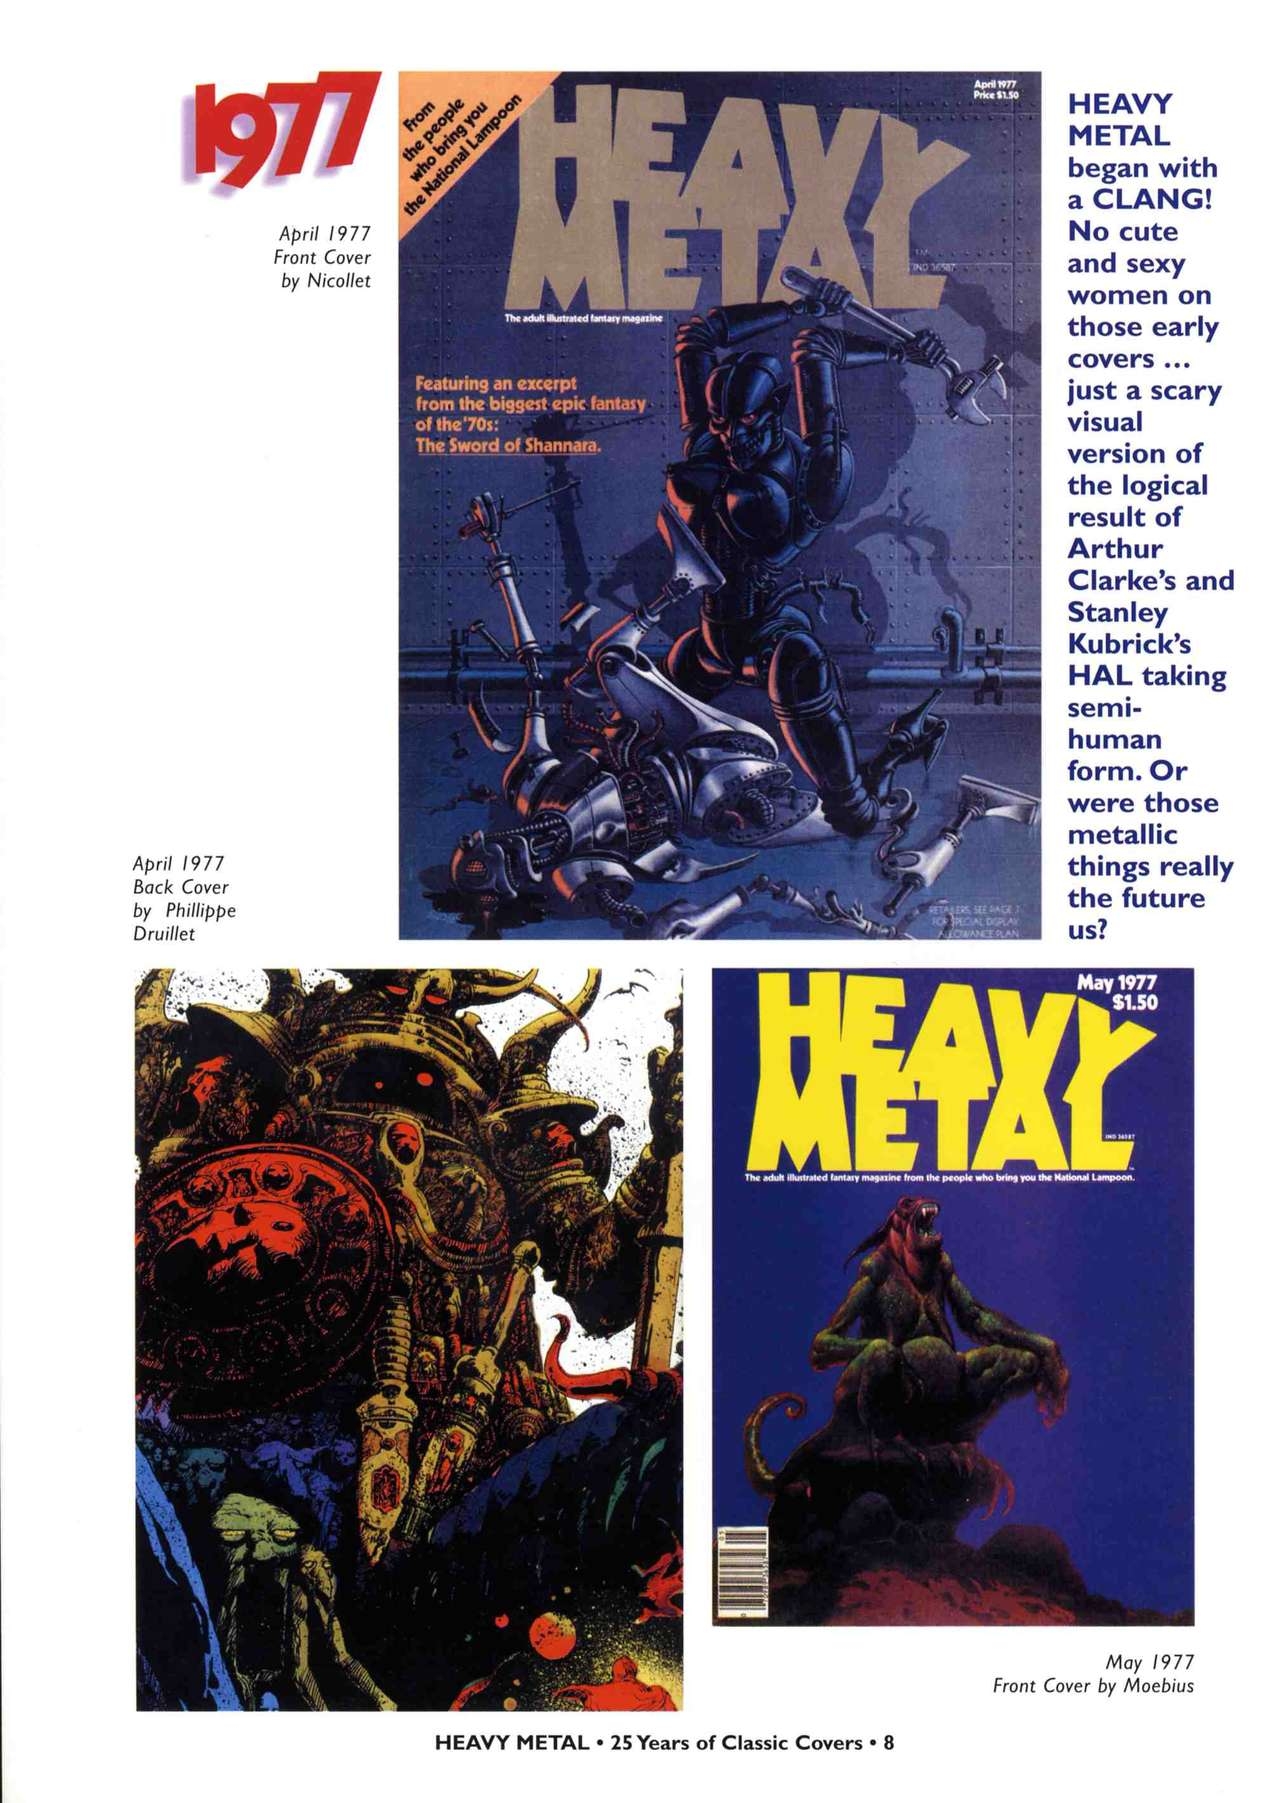 HEAVY METAL 25 Years of Classic Covers 13